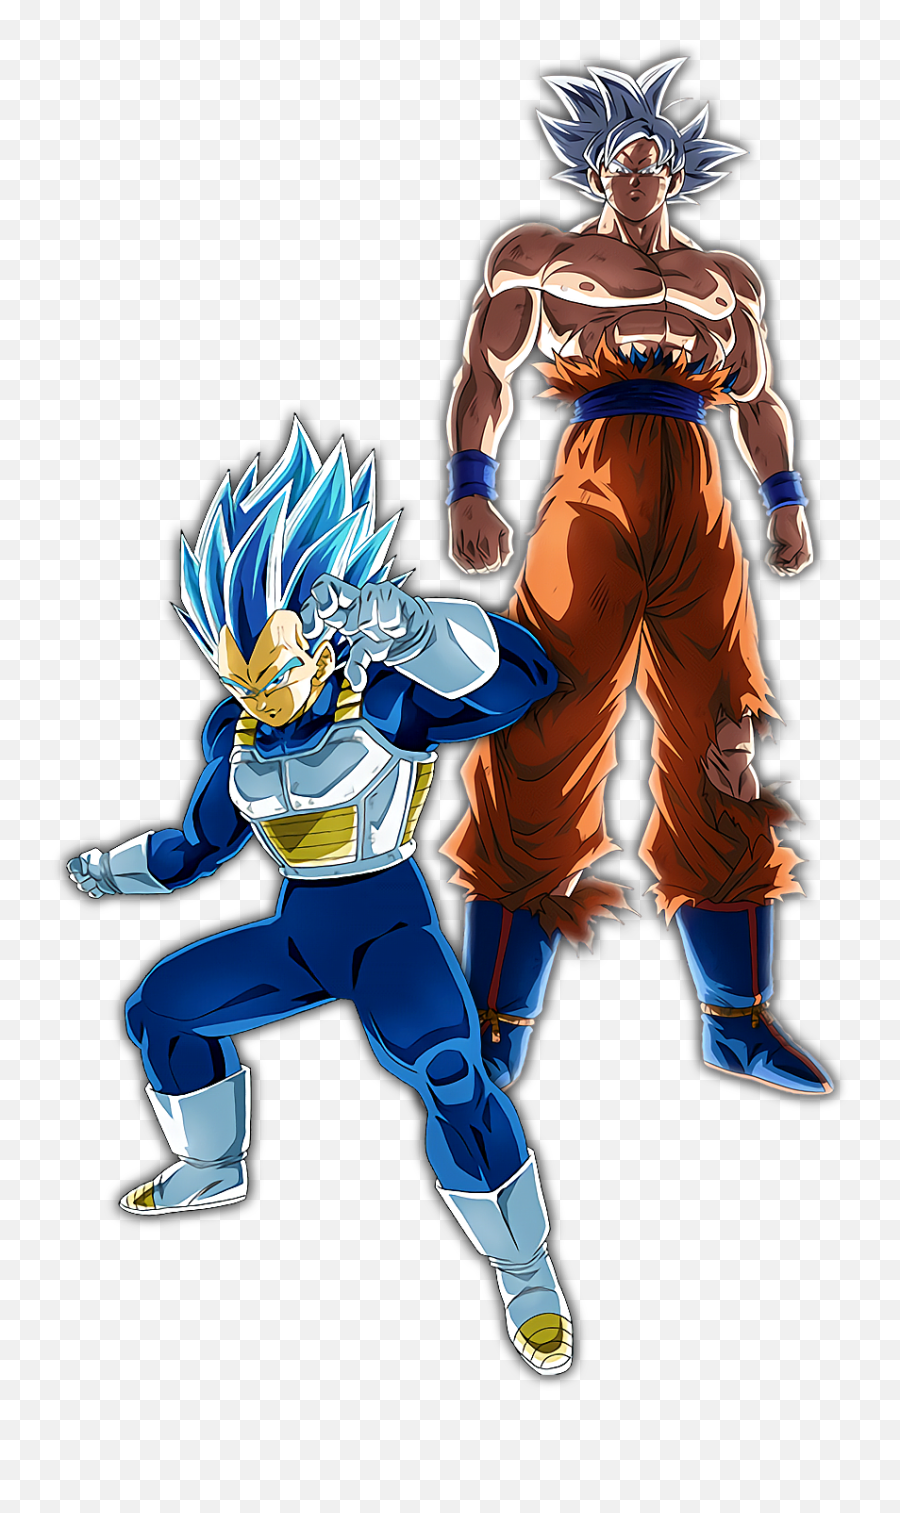 Why Did Goku And Vegeta Not Use Fusion In The Top - Quora Goku And Vegeta Top Png,Goku Face Png